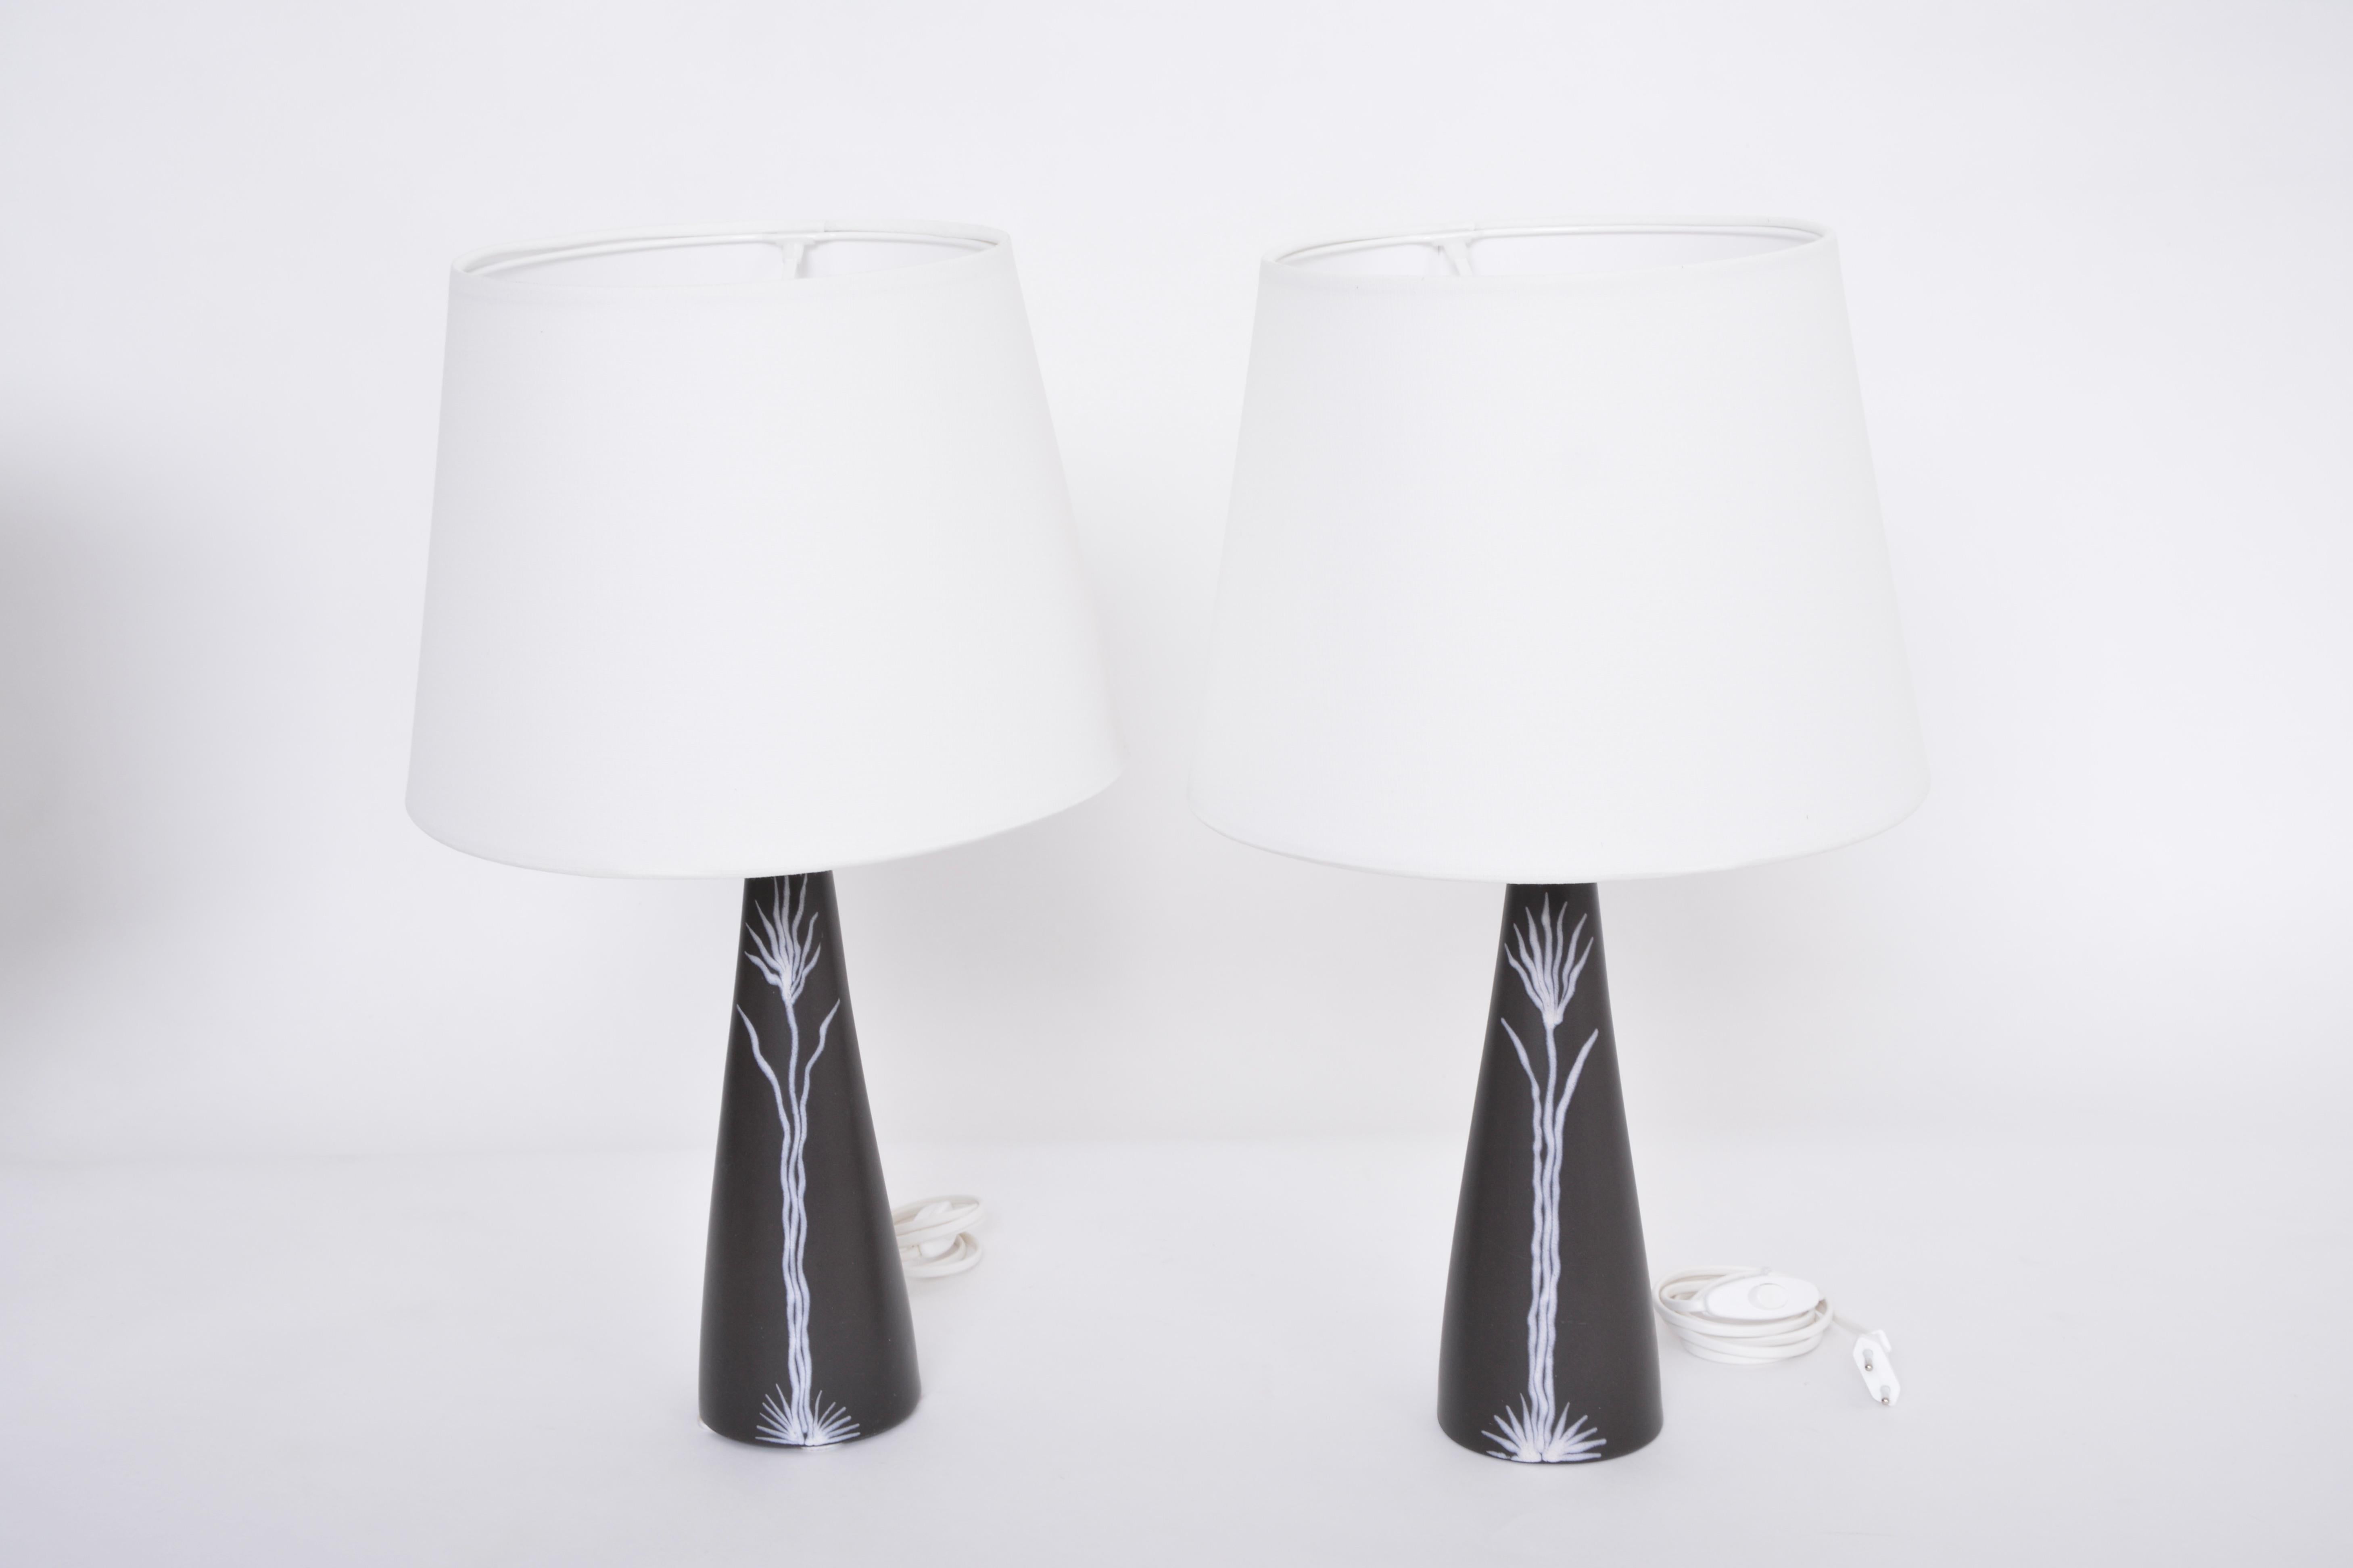 Pair of Black Danish Midcentury Ceramic Table Lamps by Holm Sorensen for Søholm For Sale 2